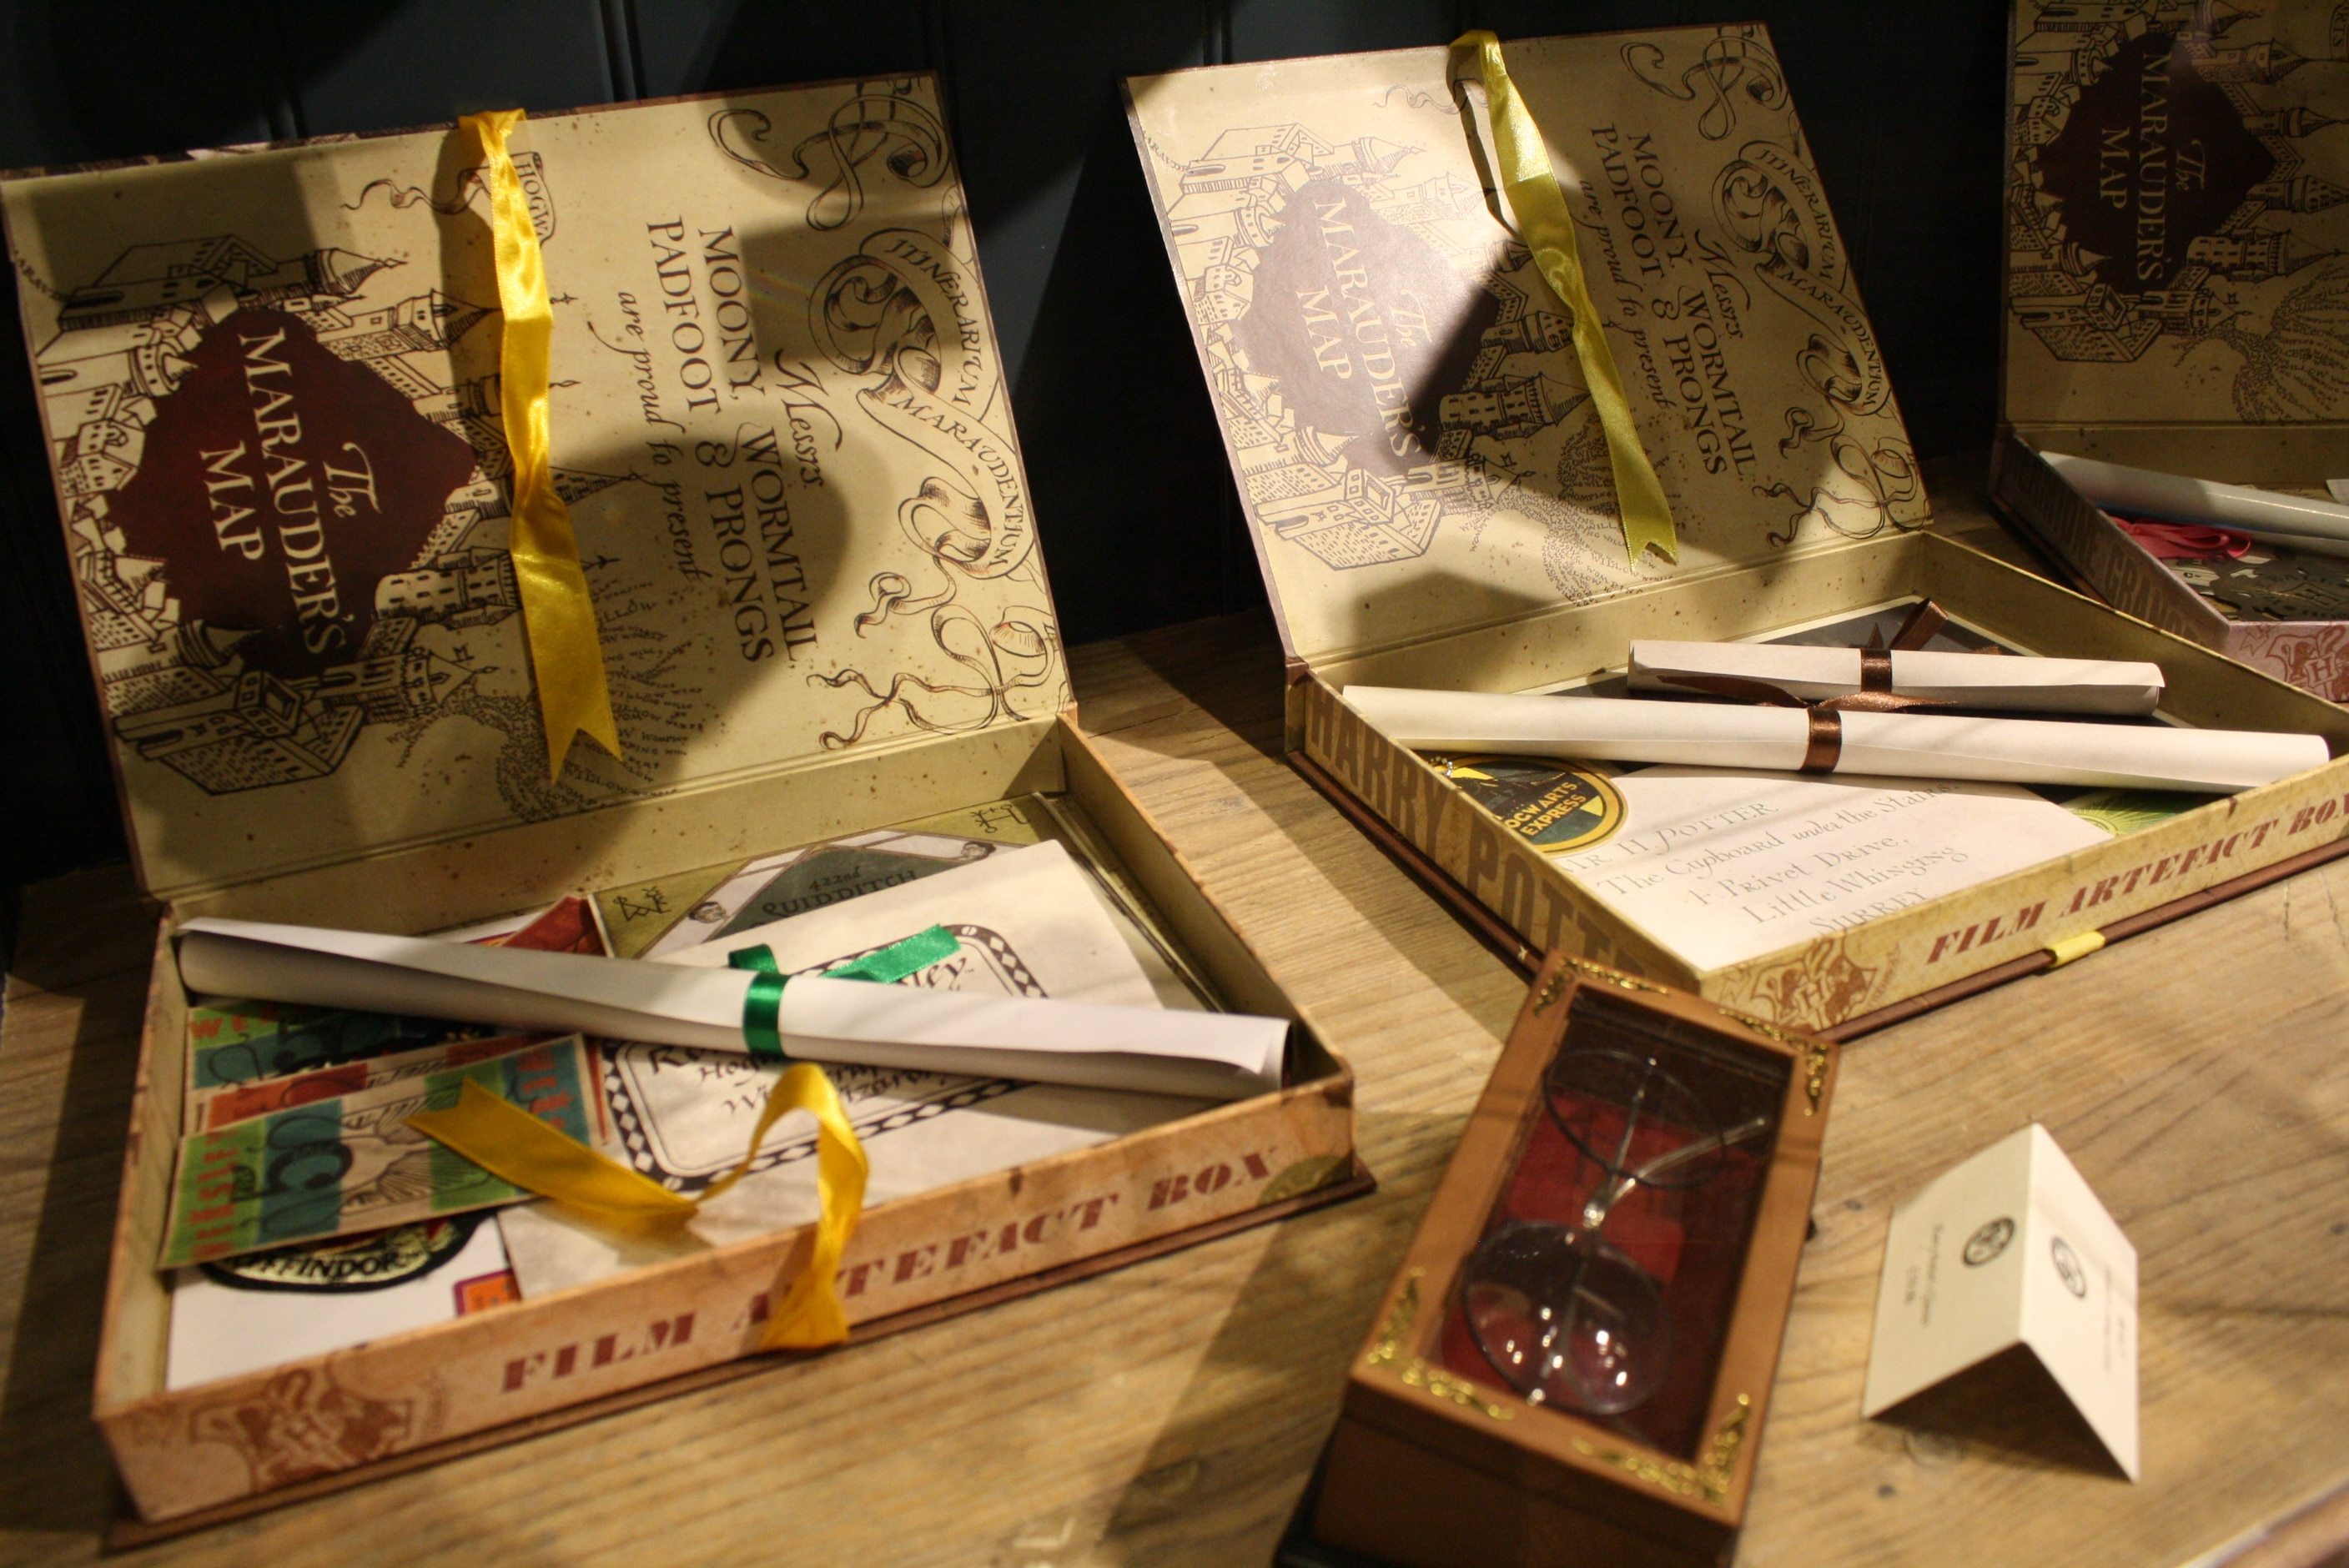 Harry potter gift ideas for adults